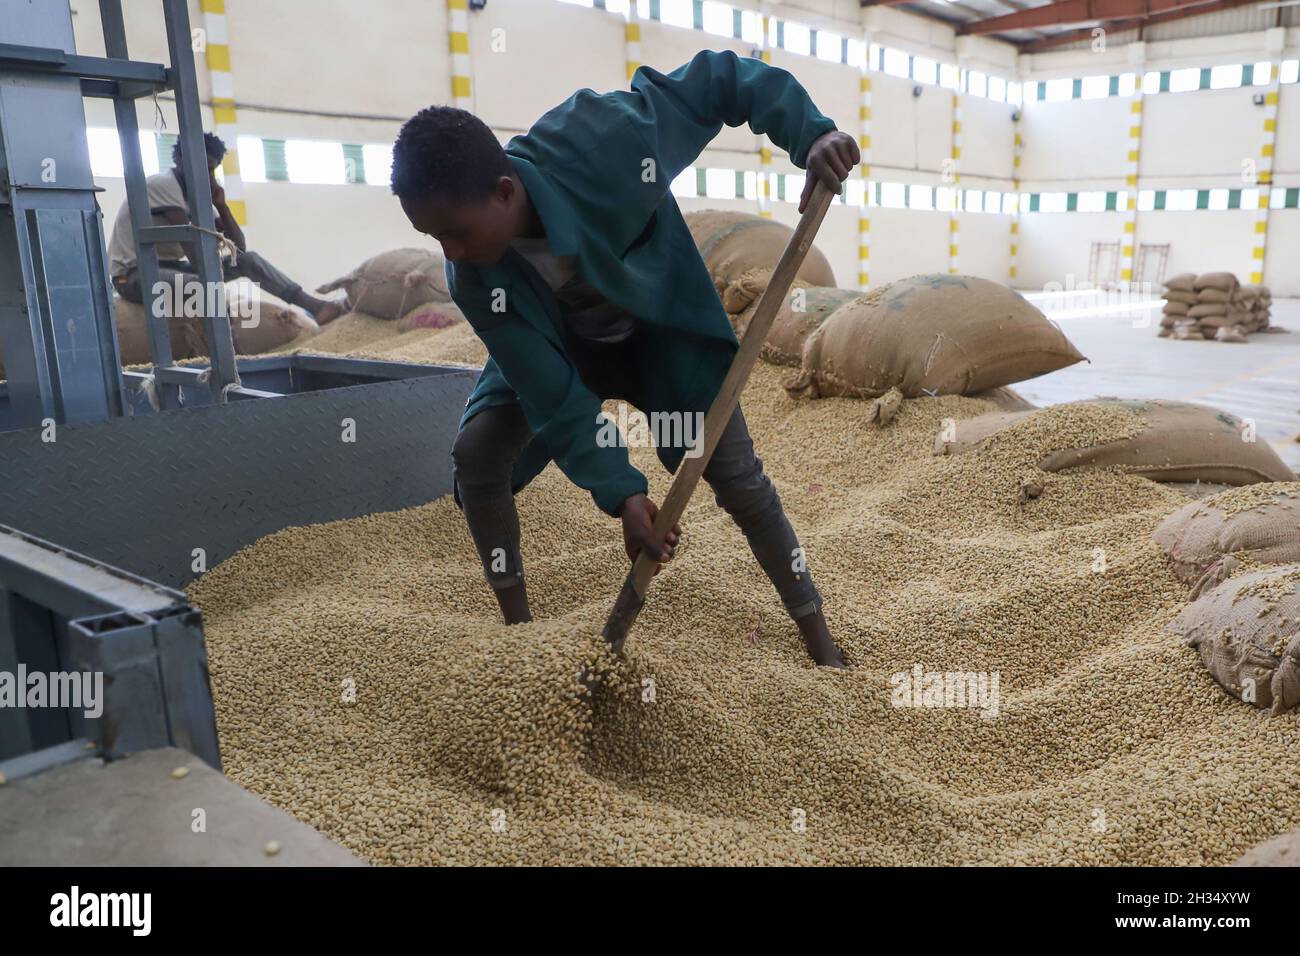 Addis Ababa, Ethiopia. 21st Oct, 2021. An employee of Kerchanshe Trading Private Limited Company (PLC) works with coffee beans at a coffee processing plant in Addis Ababa, Ethiopia, on Oct. 21, 2021. Kerchanshe Trading Private Limited Company (PLC), the largest producer and exporter of coffee in Ethiopia, says the upcoming 4th China International Import Expo (CIIE) will create a huge opportunity for coffee-producing and exporting companies. Credit: Michael Tewelde/Xinhua/Alamy Live News Stock Photo